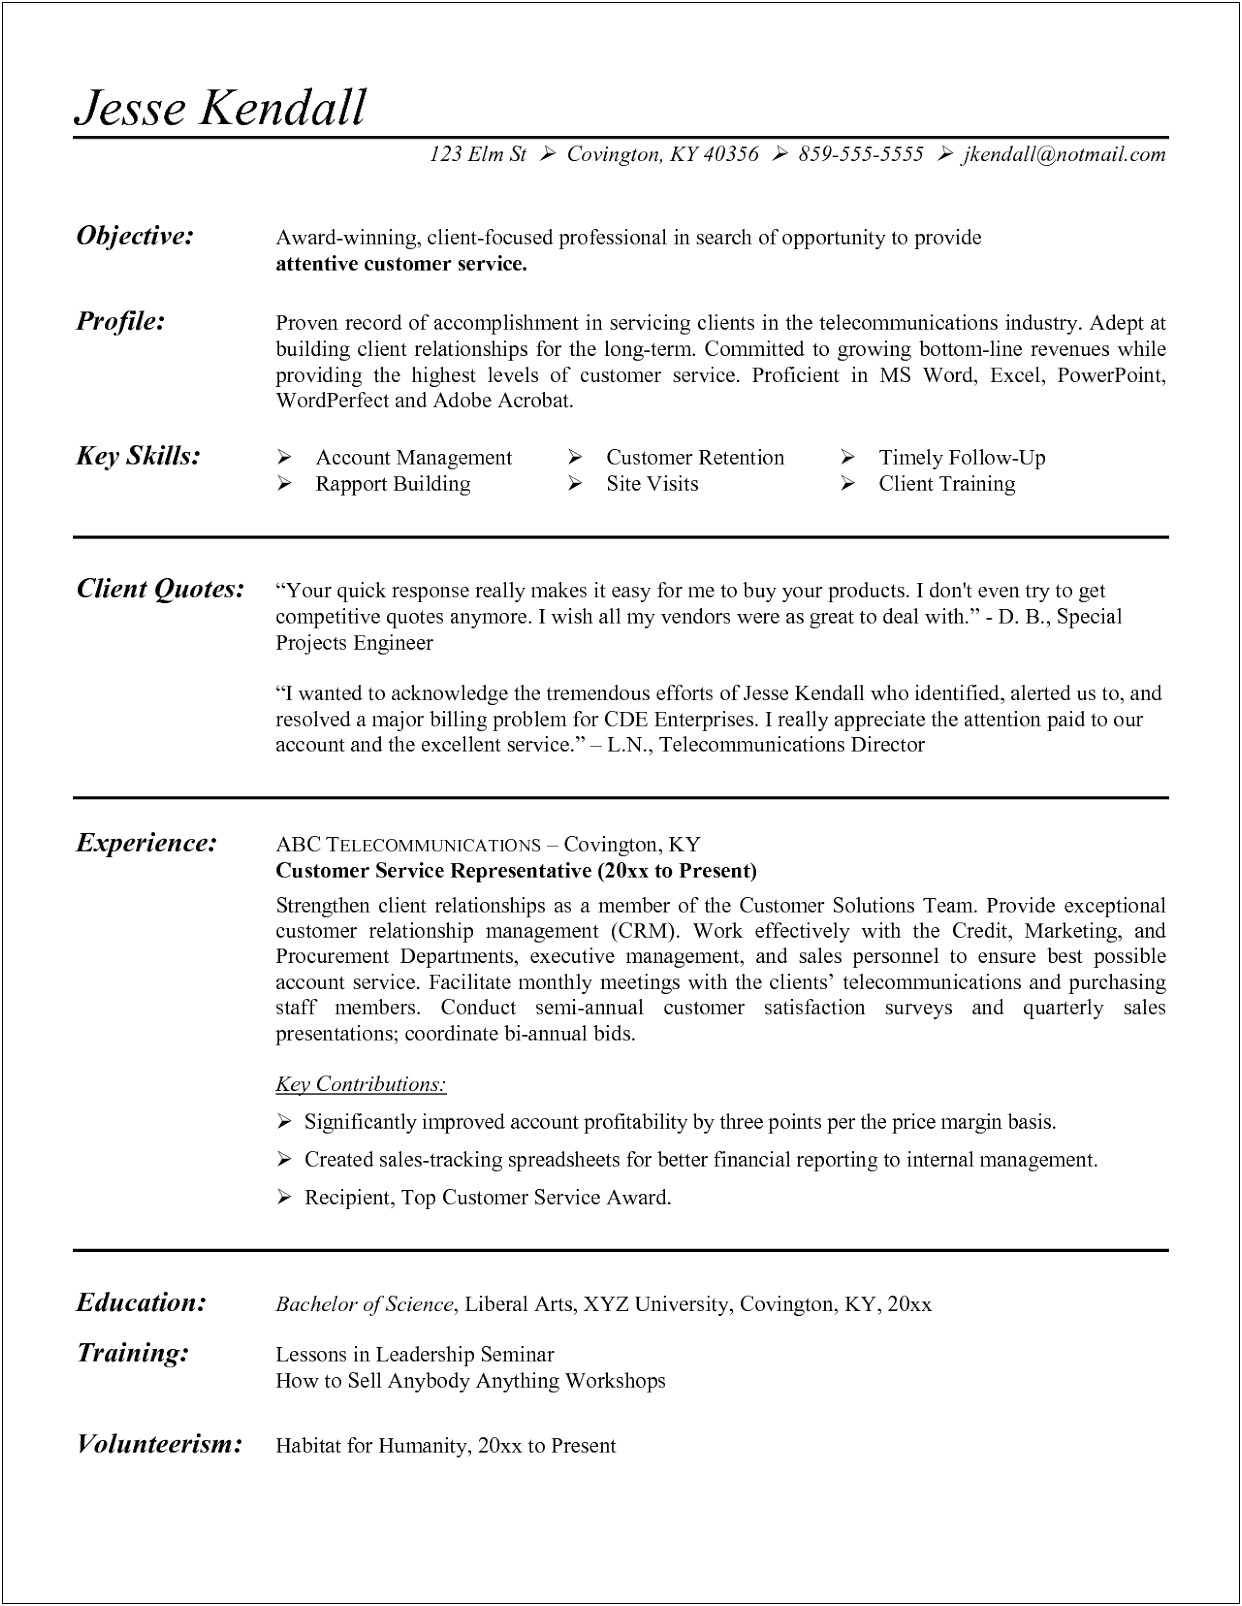 Examples Of Customer Service Manager Resume